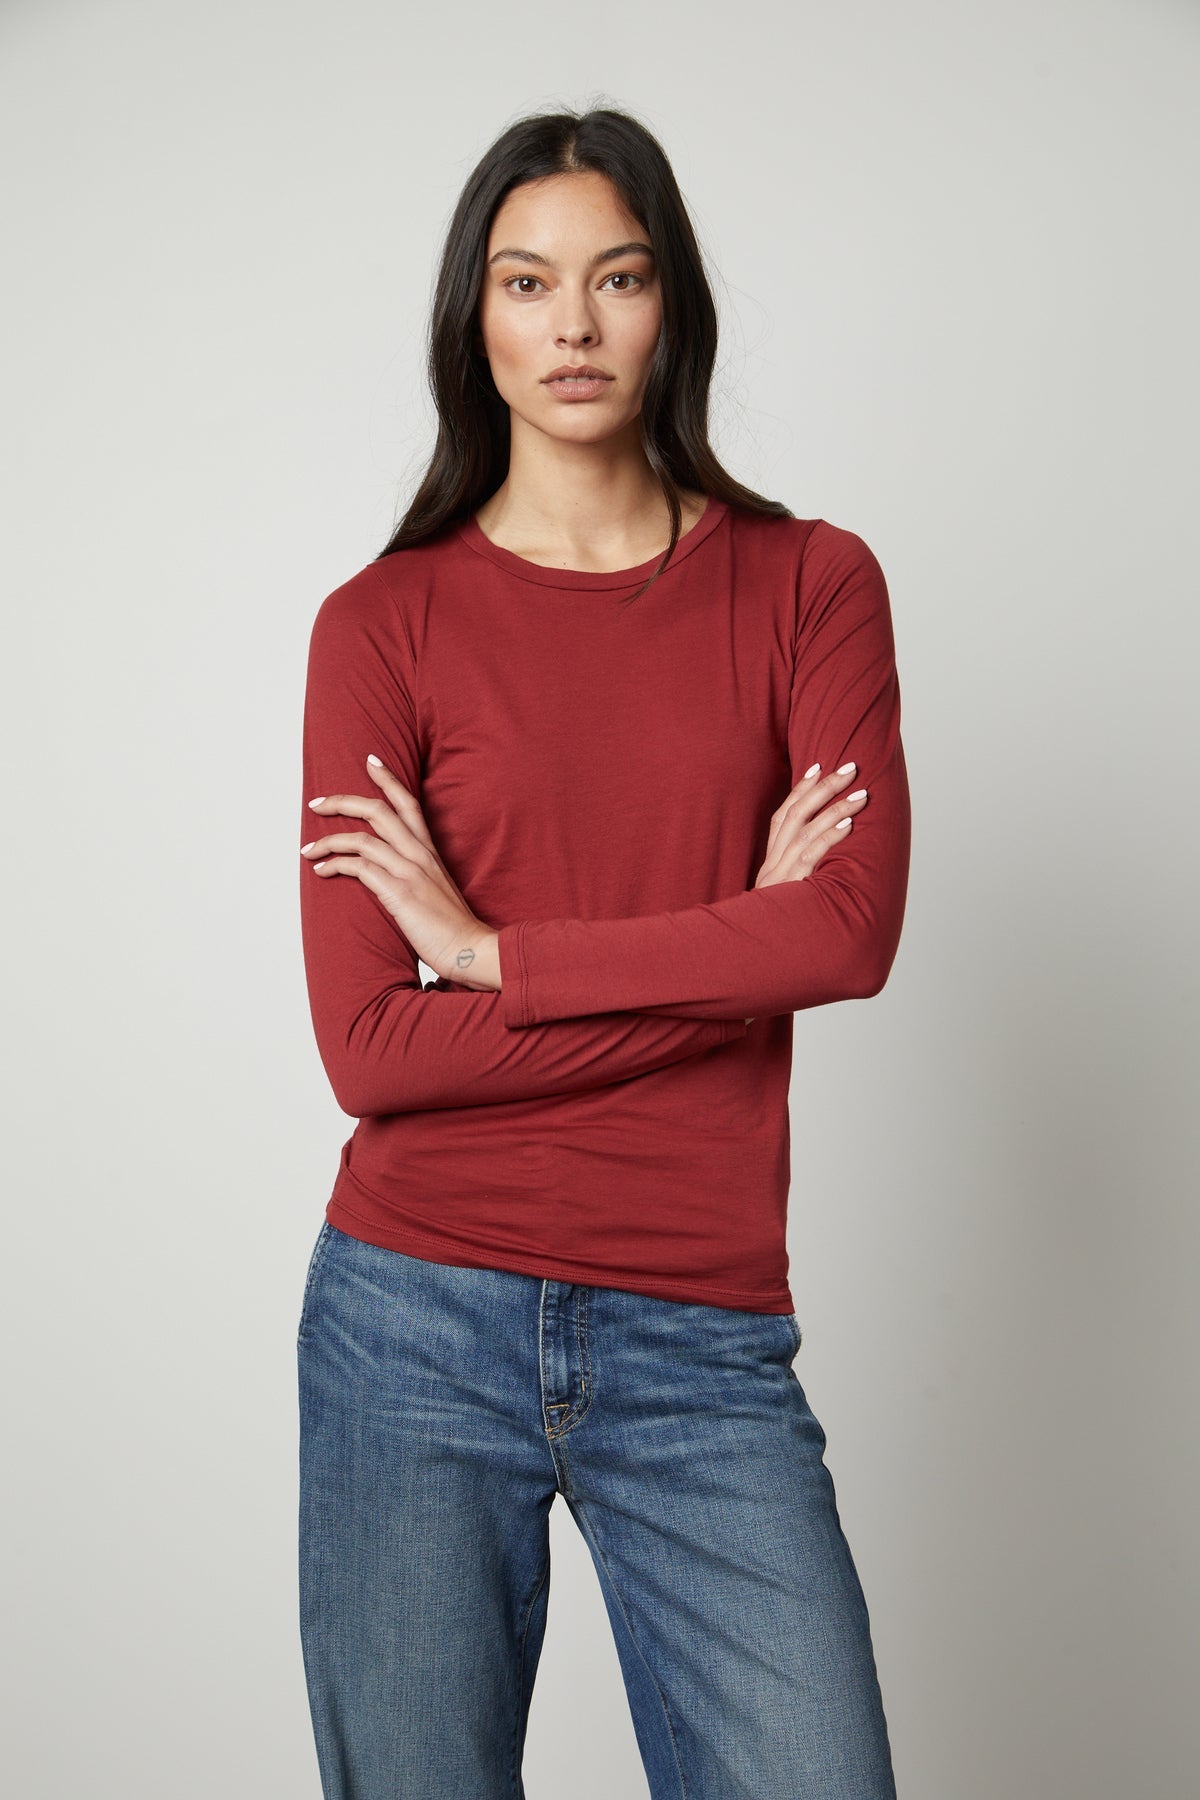 A woman wearing a ZOFINA GAUZY WHISPER FITTED CREW NECK TEE by Velvet by Graham & Spencer, which has a universally flattering cut and is red with long sleeves.-35783263158465